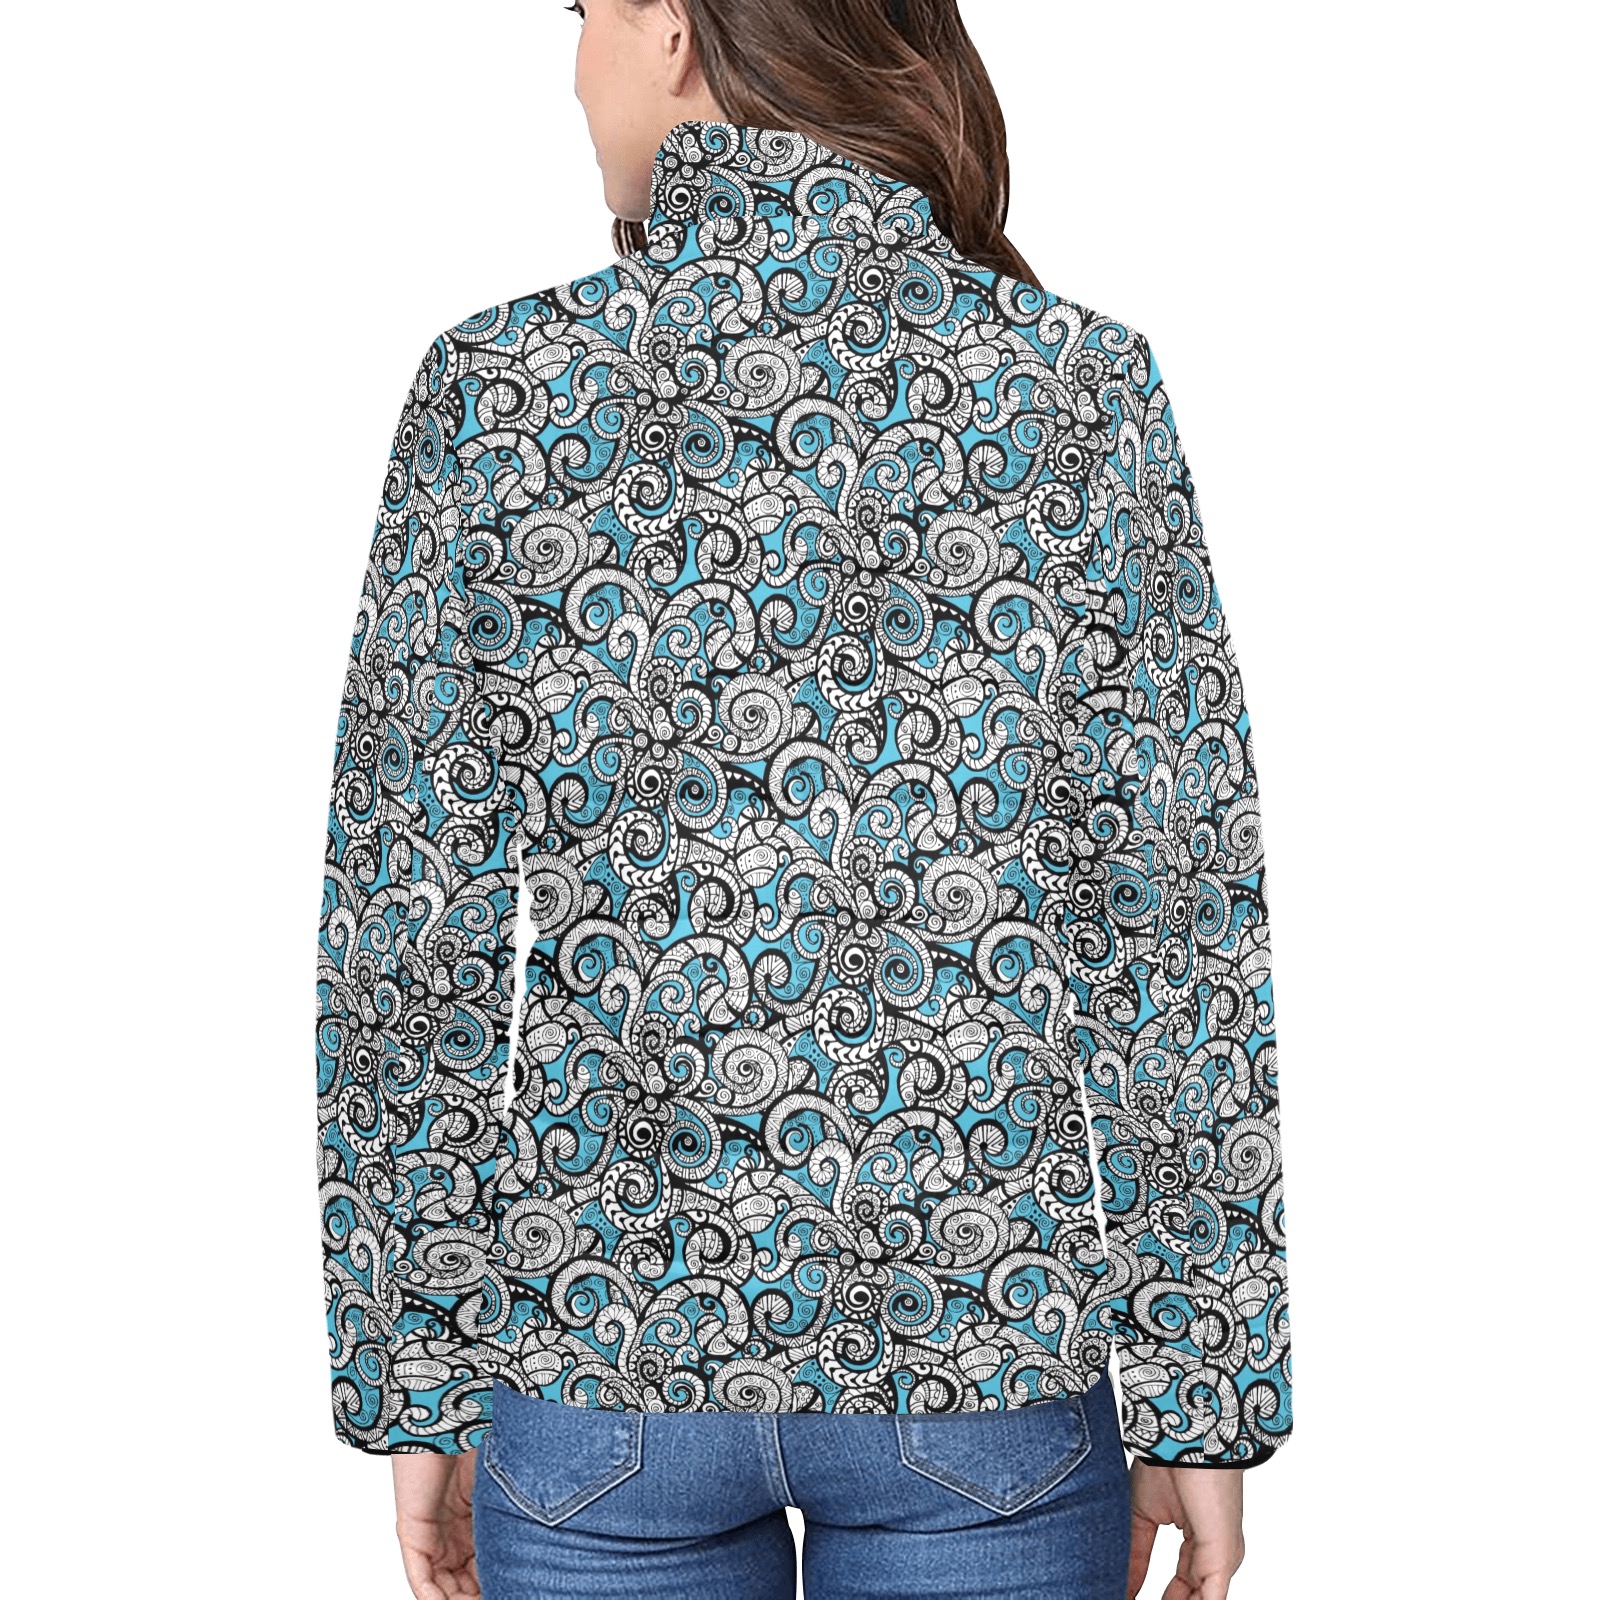 Let Your Spirit Wander in Teal Blue Women's Stand Collar Padded Jacket (Model H41)